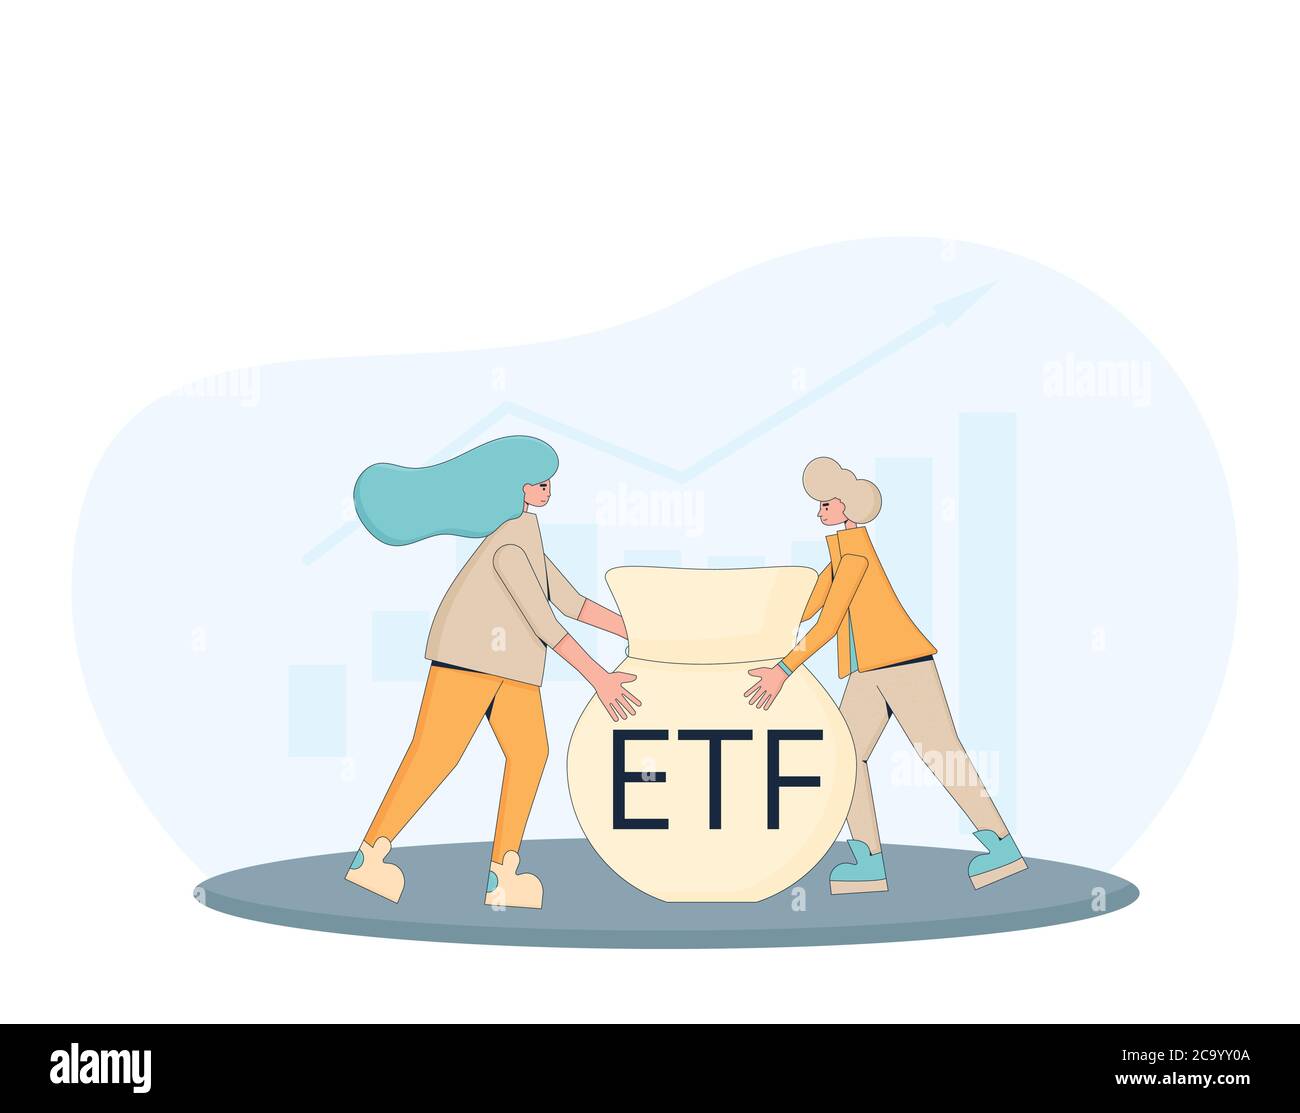 ETF concept. Economic diversification. Two investors holding a bag with Exchange Traded Funds. Young man and woman with investment symbols. Line art f Stock Vector